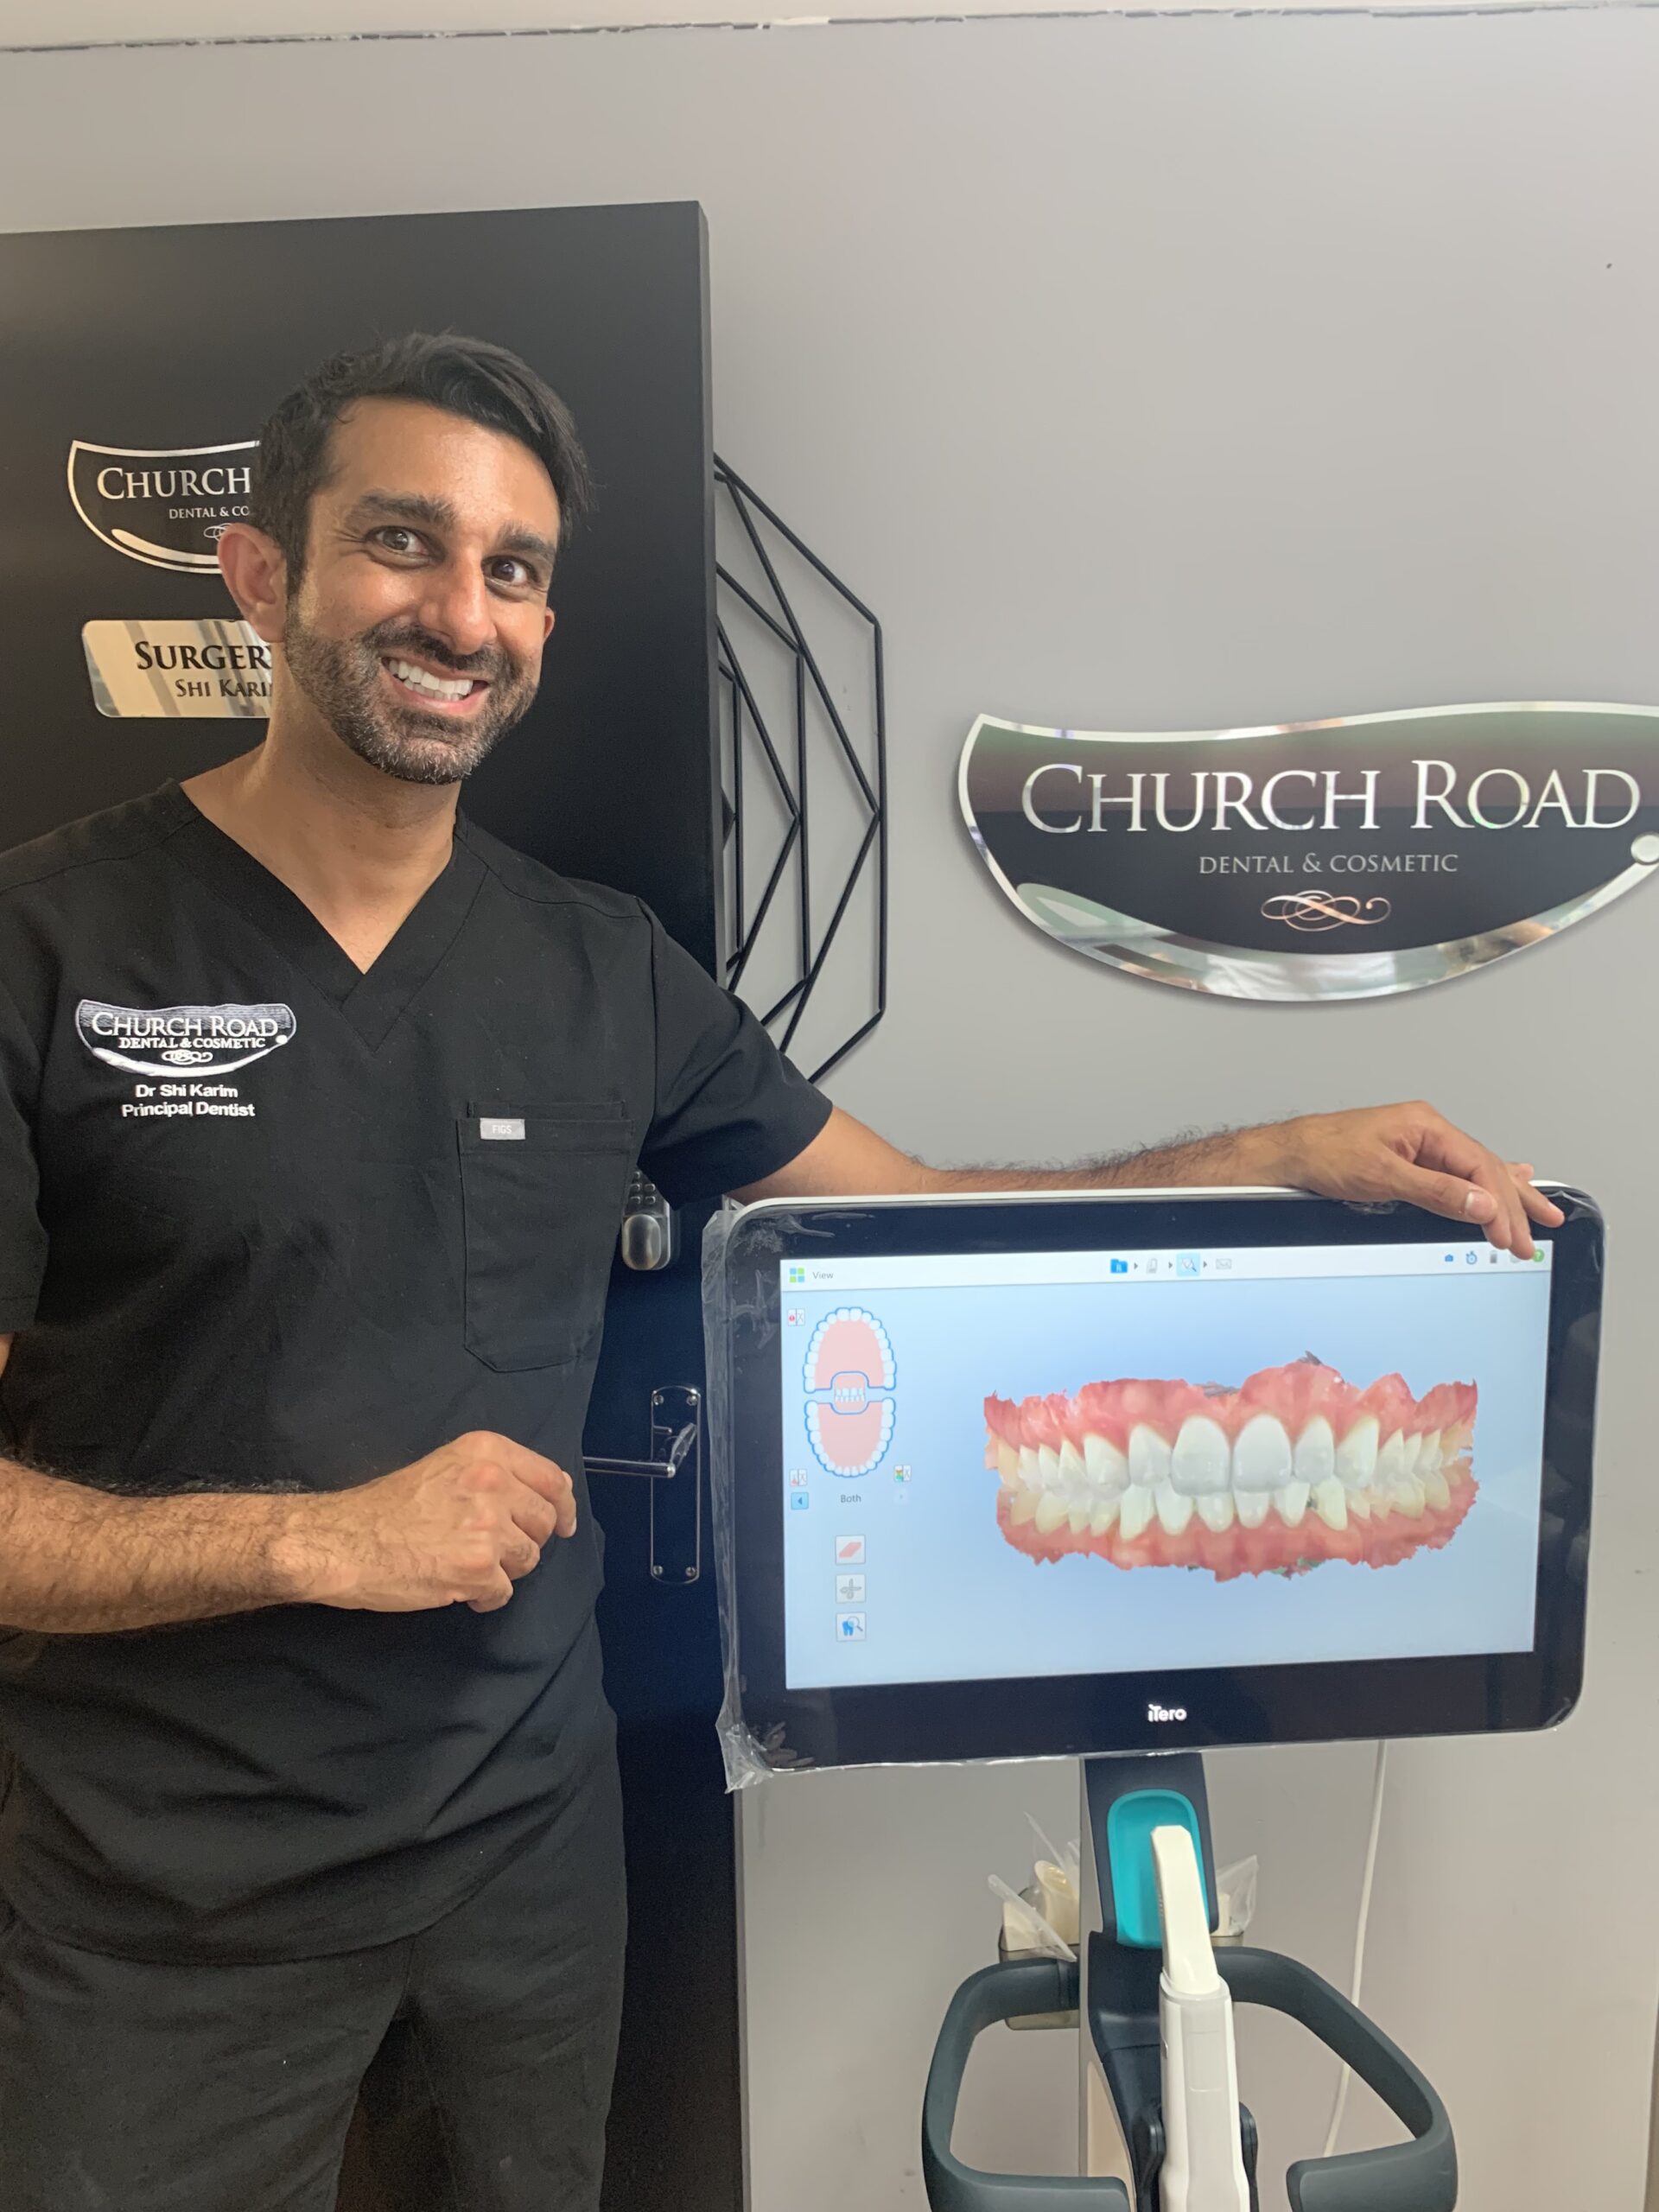 to show the 3D image of the teeth